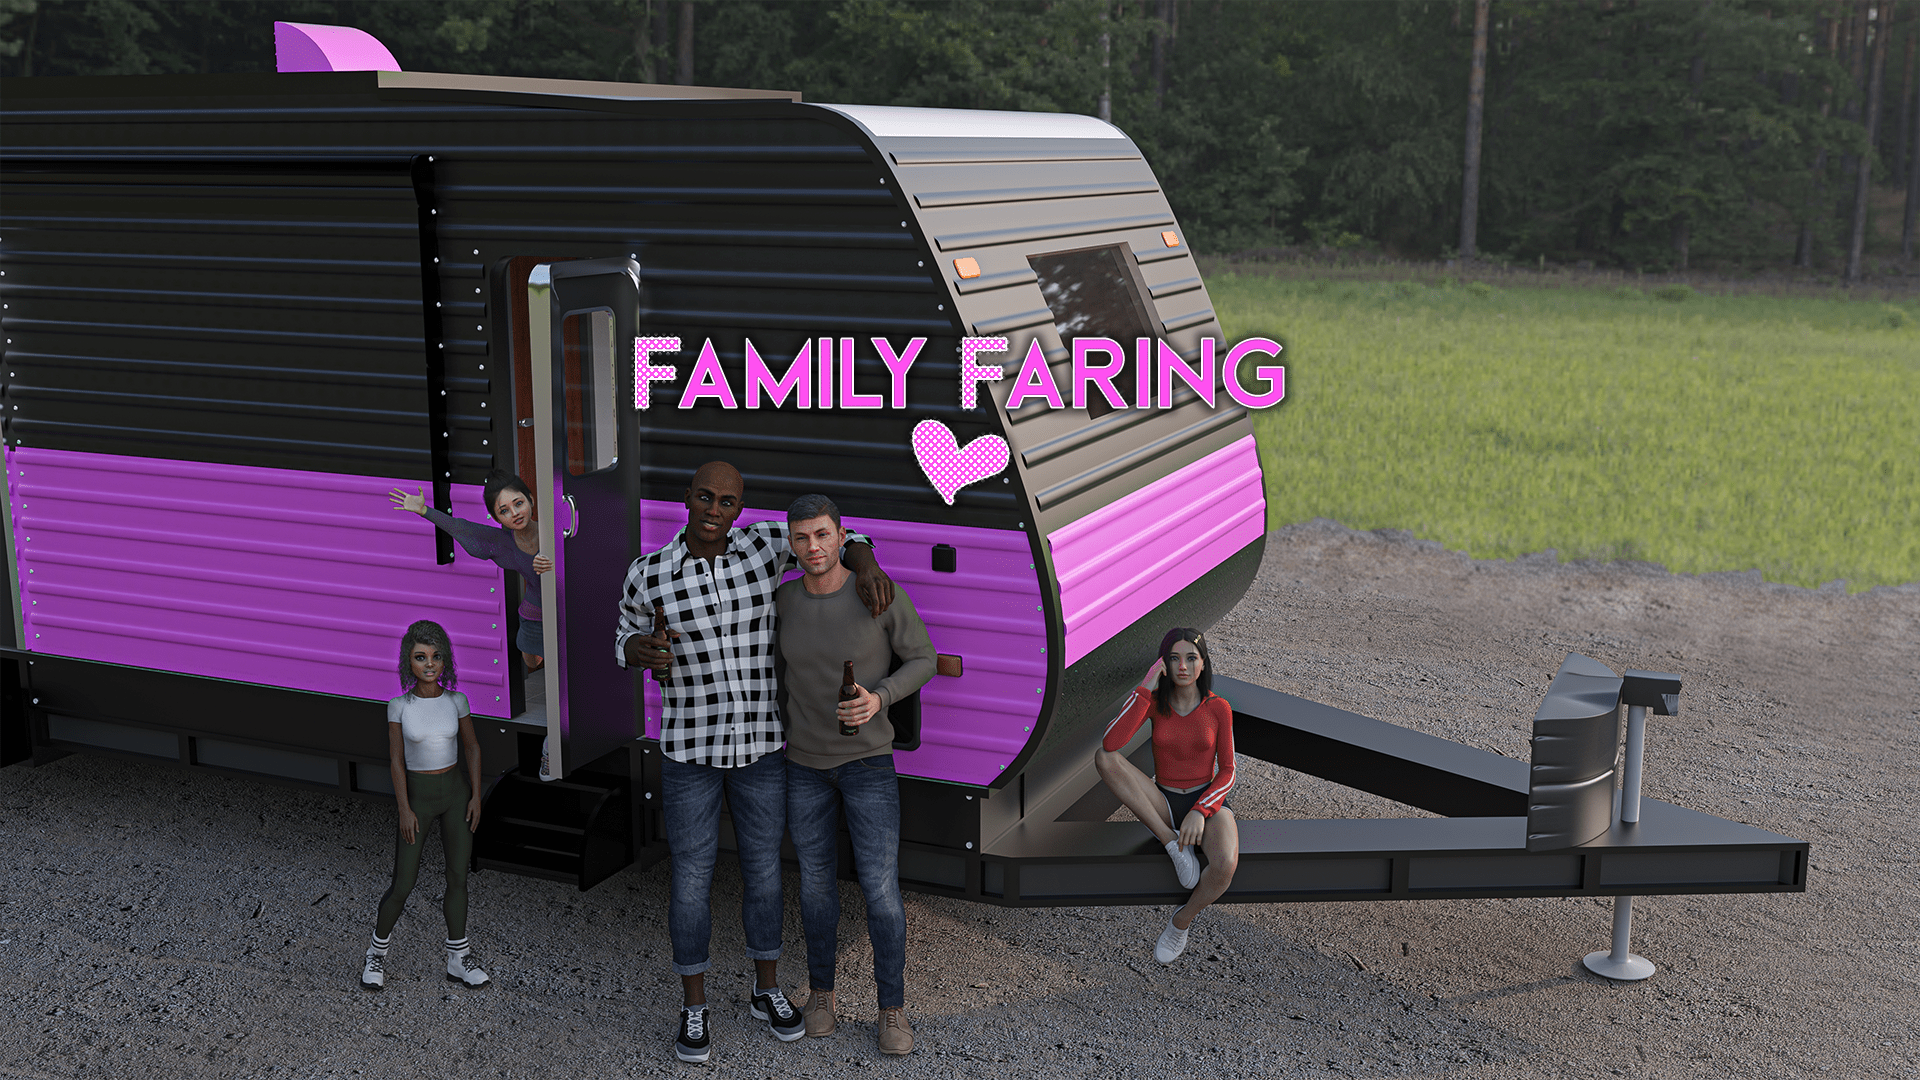 18+] Family Faring - Episode 2 Released! - Release Announcements - itch.io